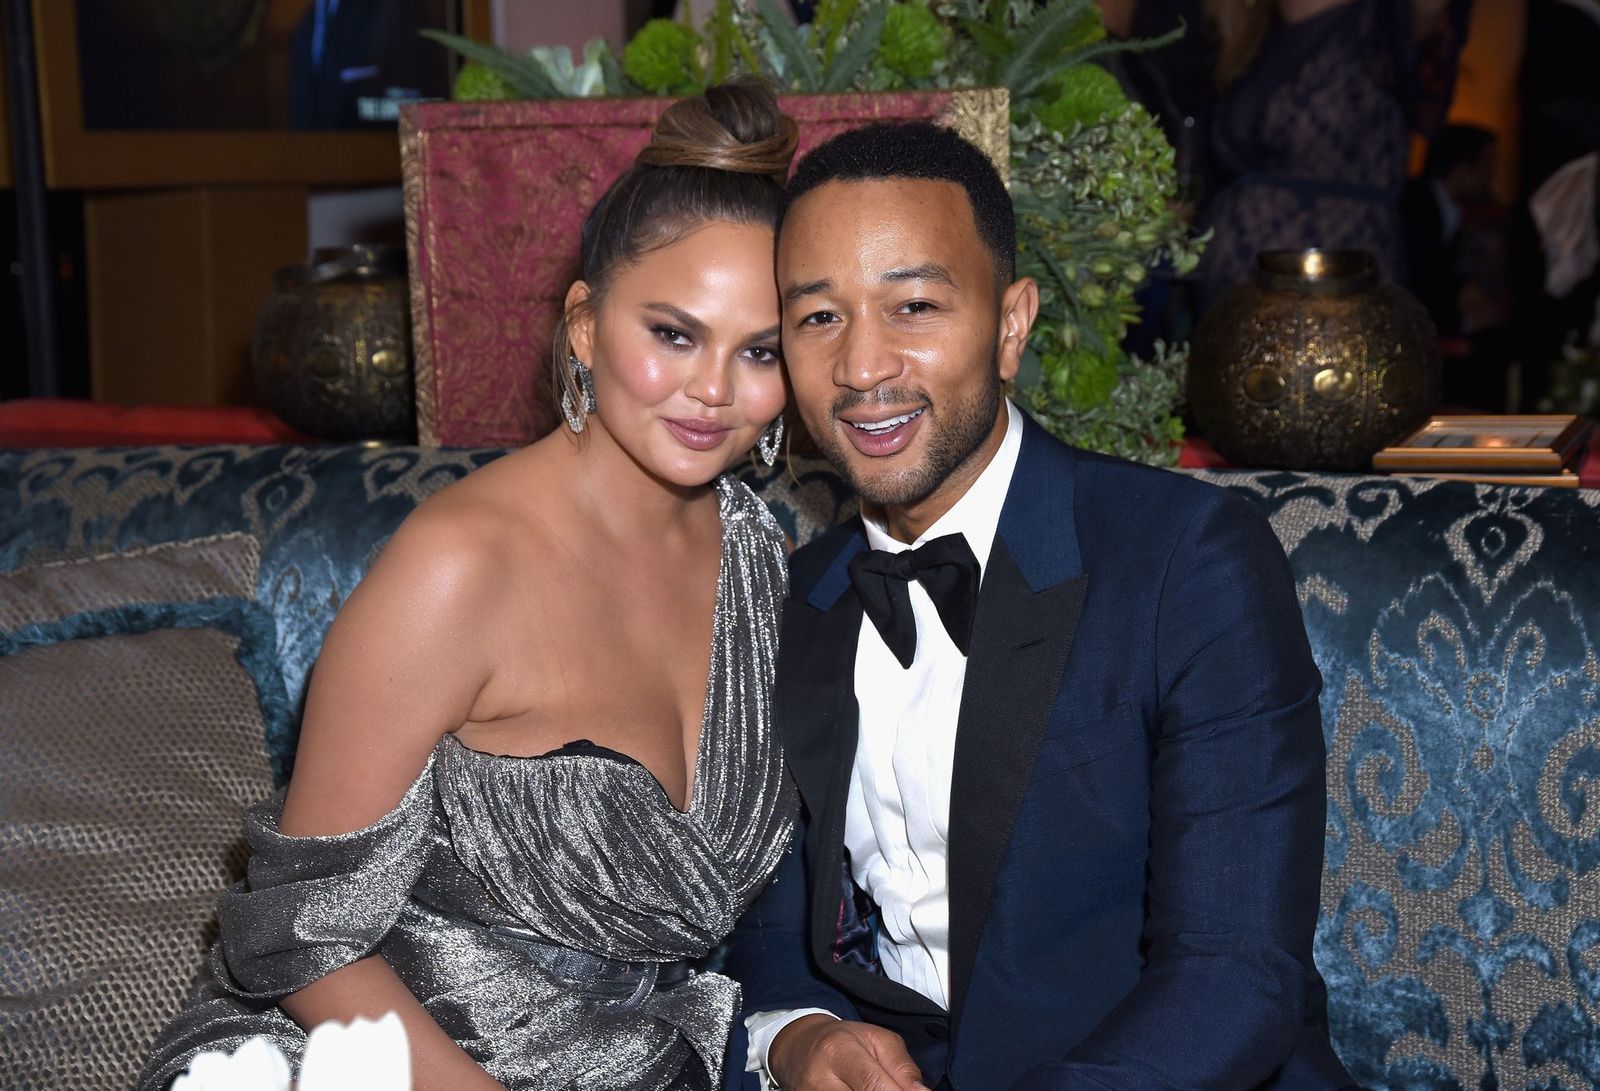 Chrissy Teigen and John Legend at Hulu's Emmy Party at Nomad Hotel on September 17, 2018, in Los Angeles, California | Photo: Presley Ann/Getty Images